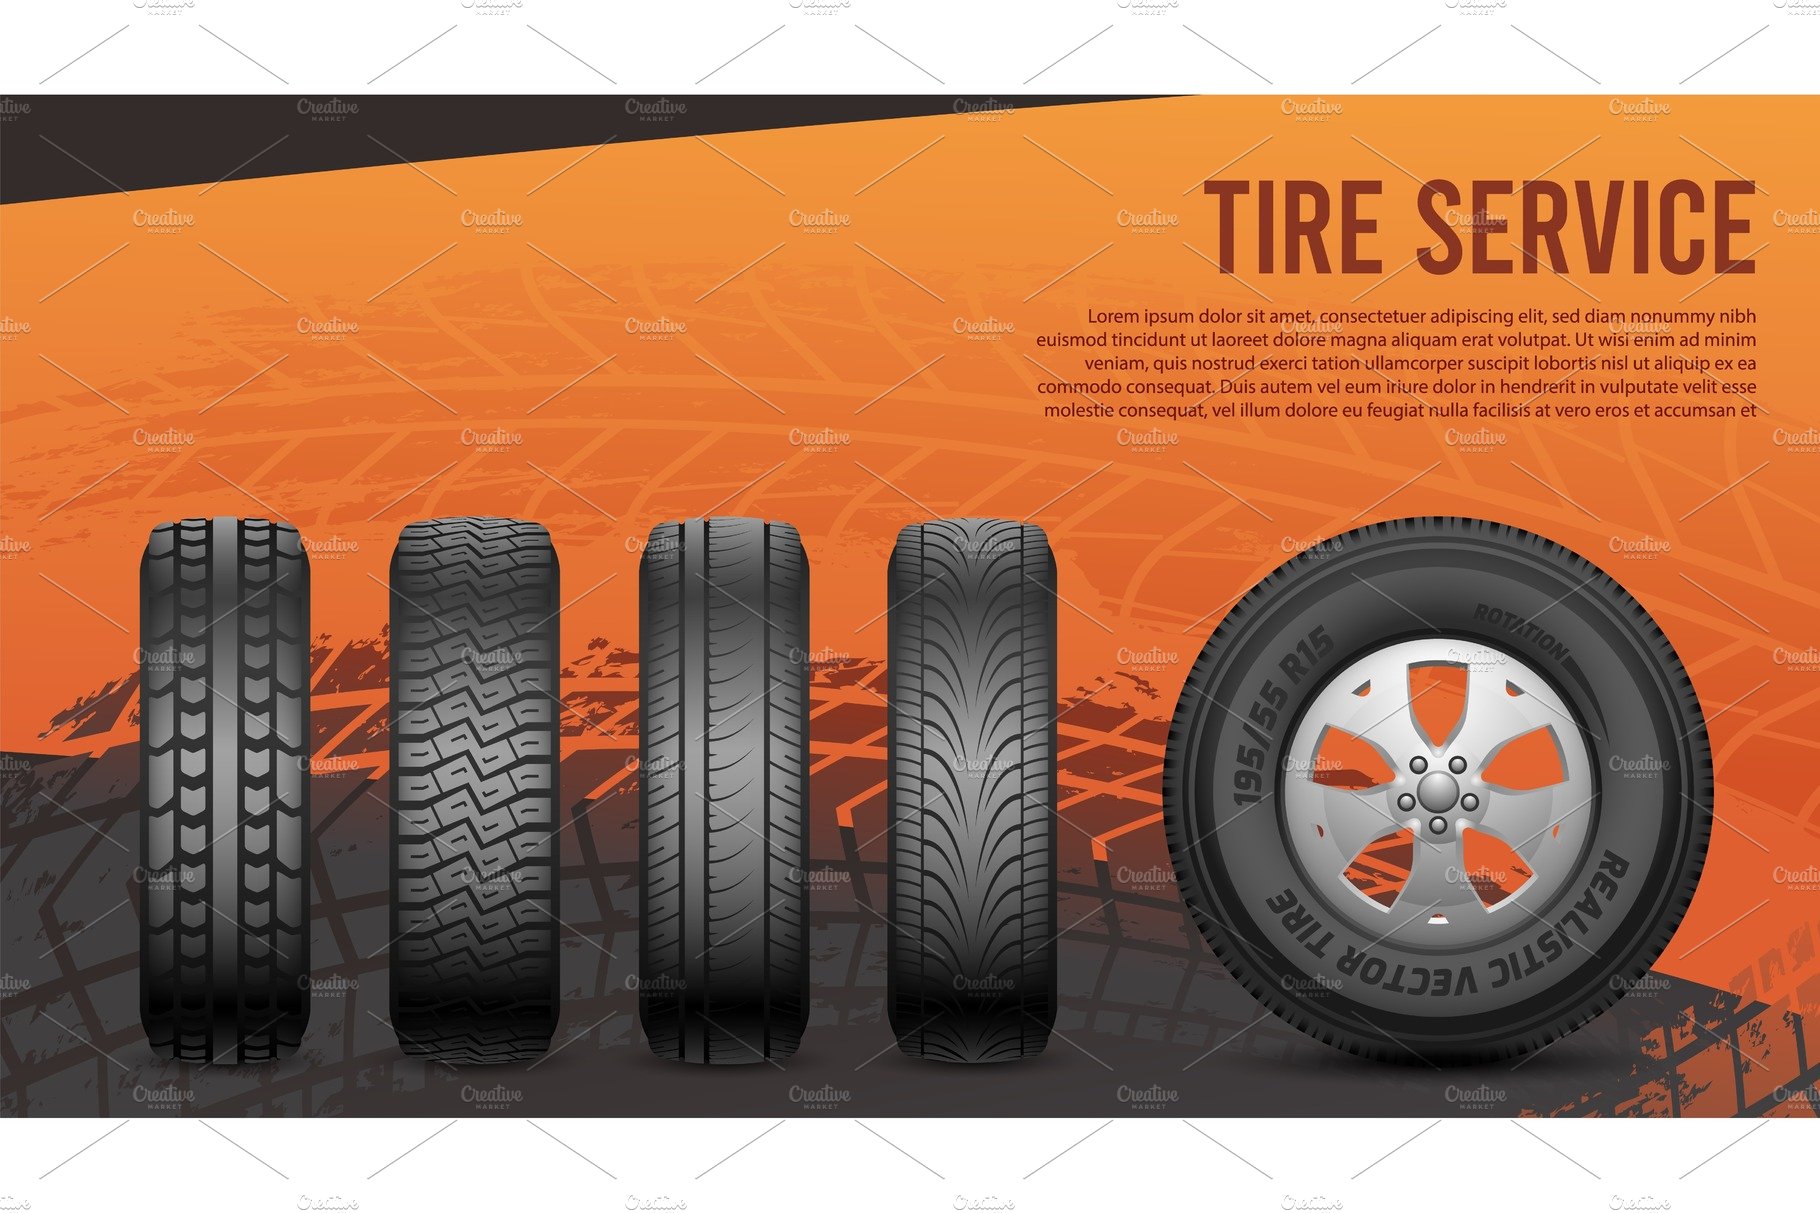 Tire service banner. Tires, car cover image.